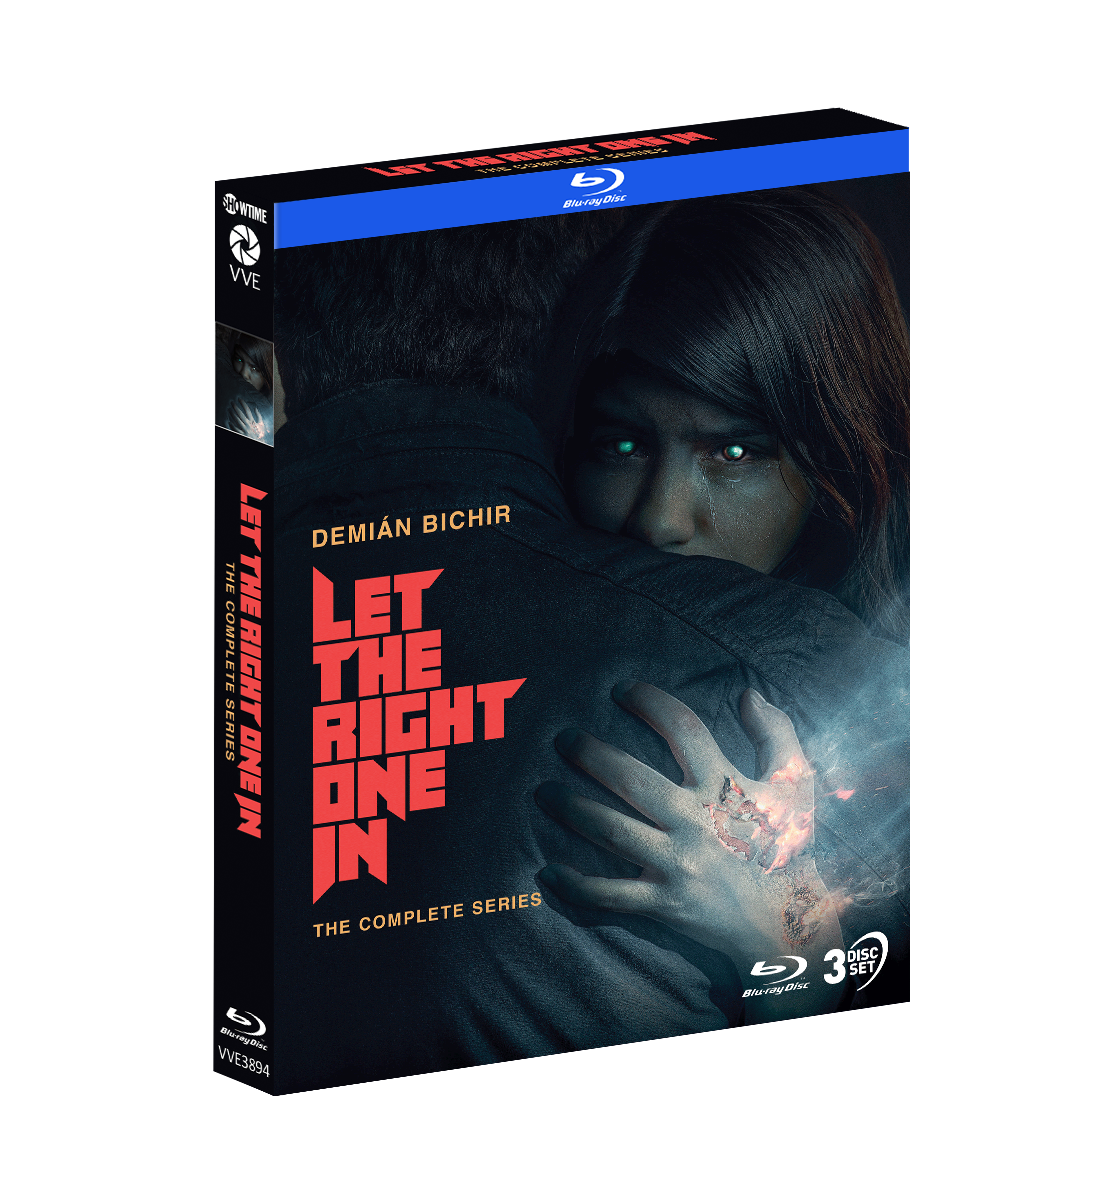 https://viavision.com.au/wp-content/uploads/VVE3894-Let-the-Right-One-In-Blu-ray-SLIPCASE-3D.png